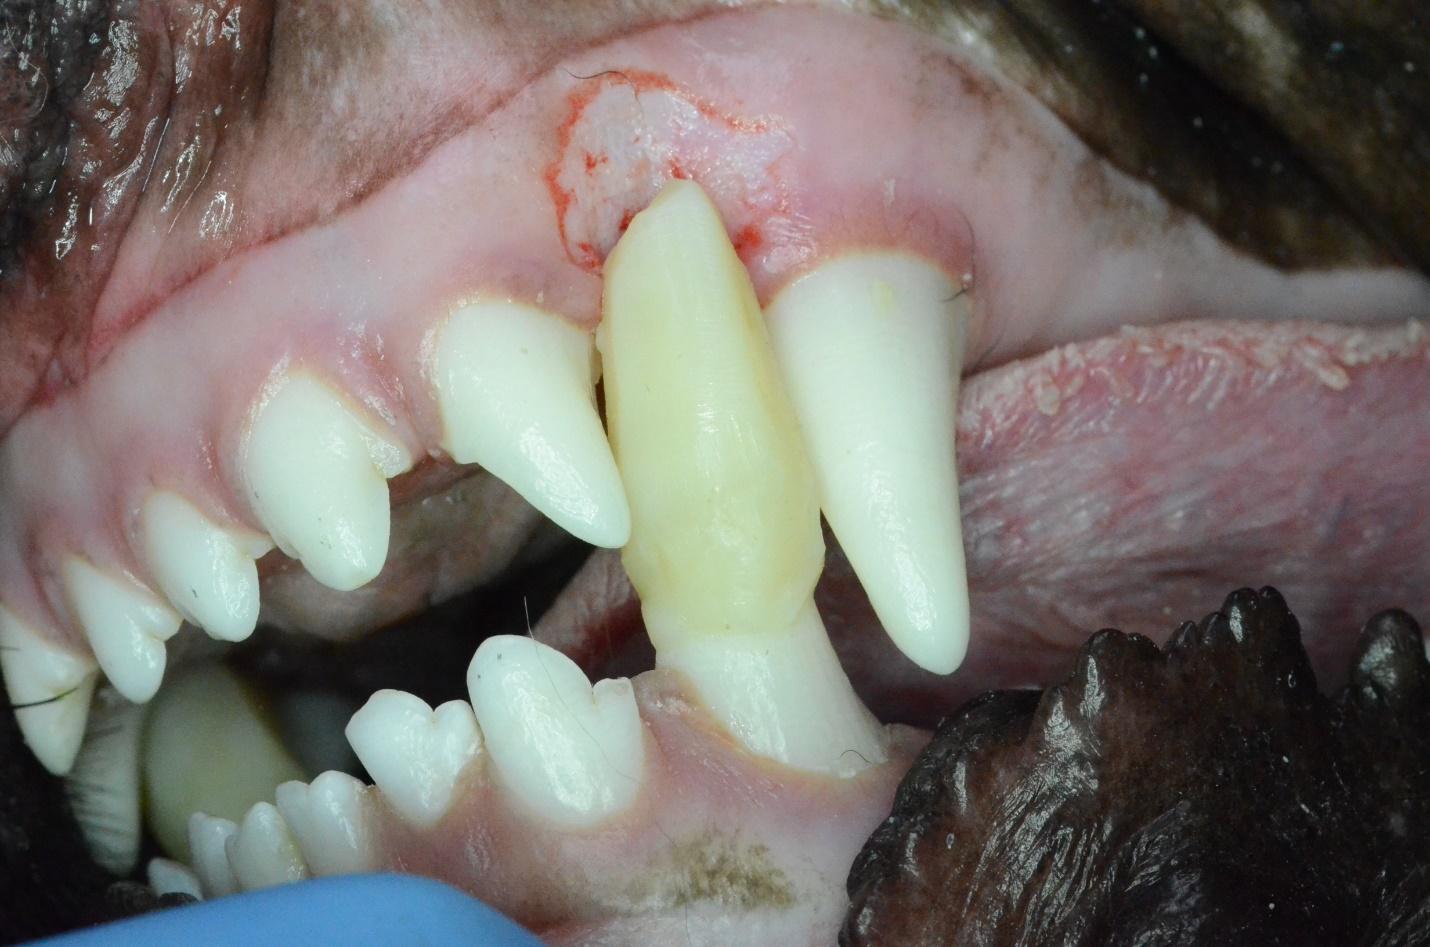 Image post crown extension fabrication on the left mandibular canine and sloping of the above gingiva 